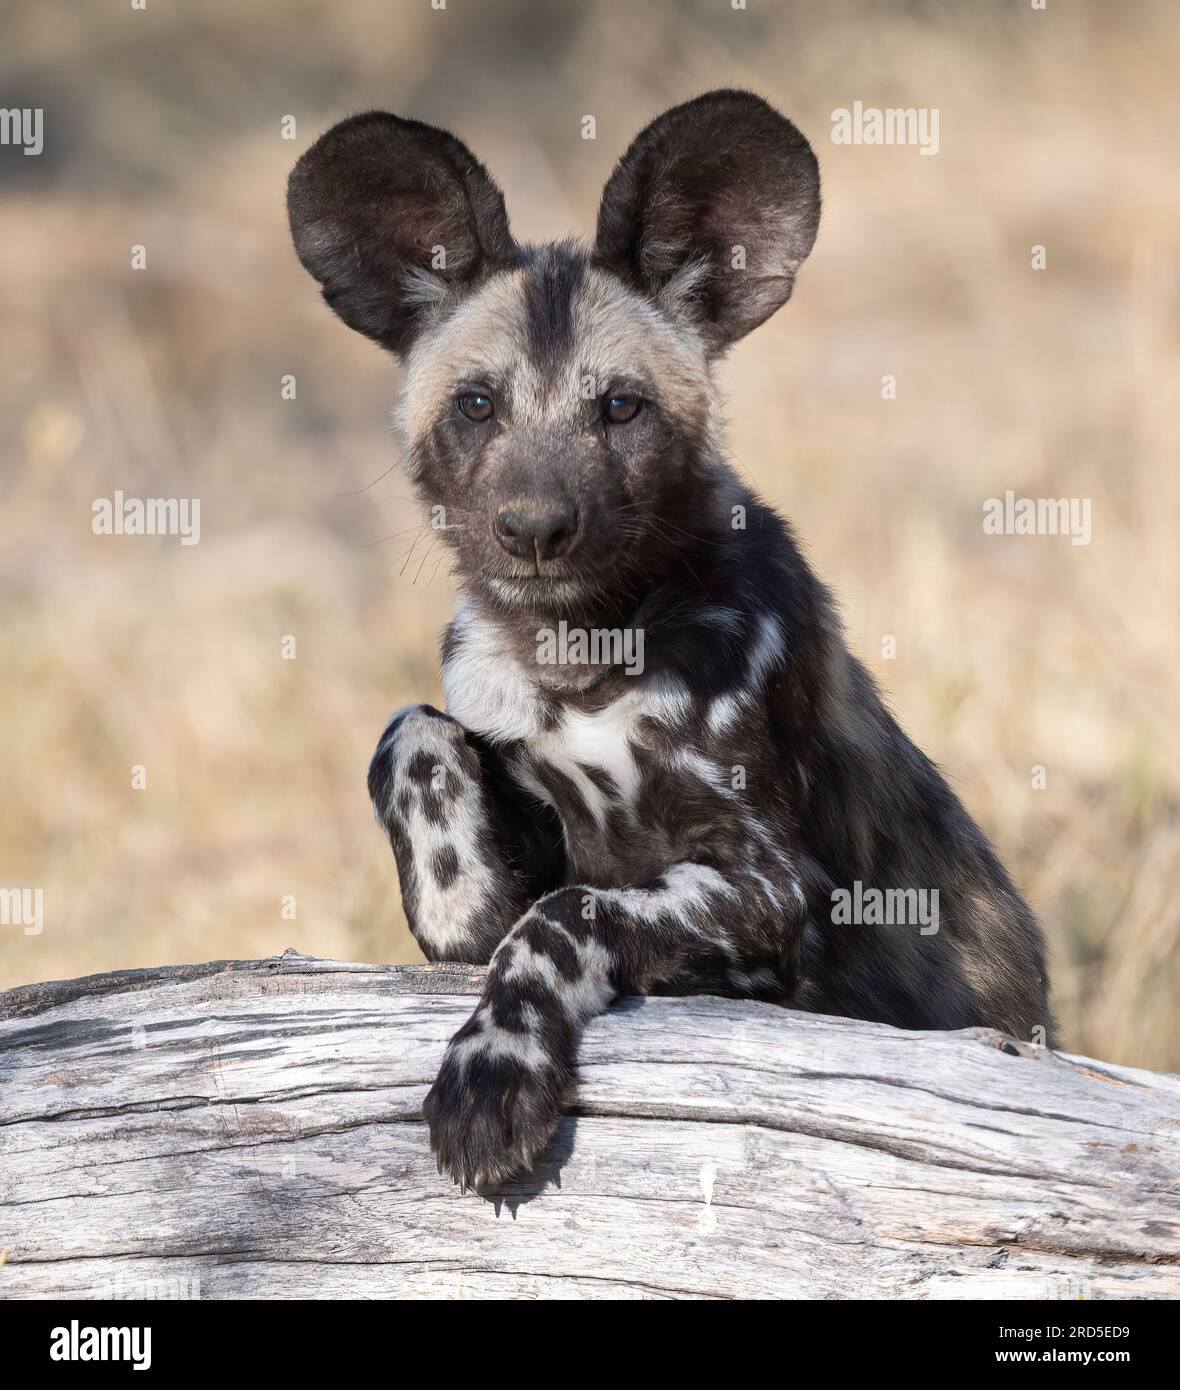 Wild dog puppy pops up over a log Stock Photo